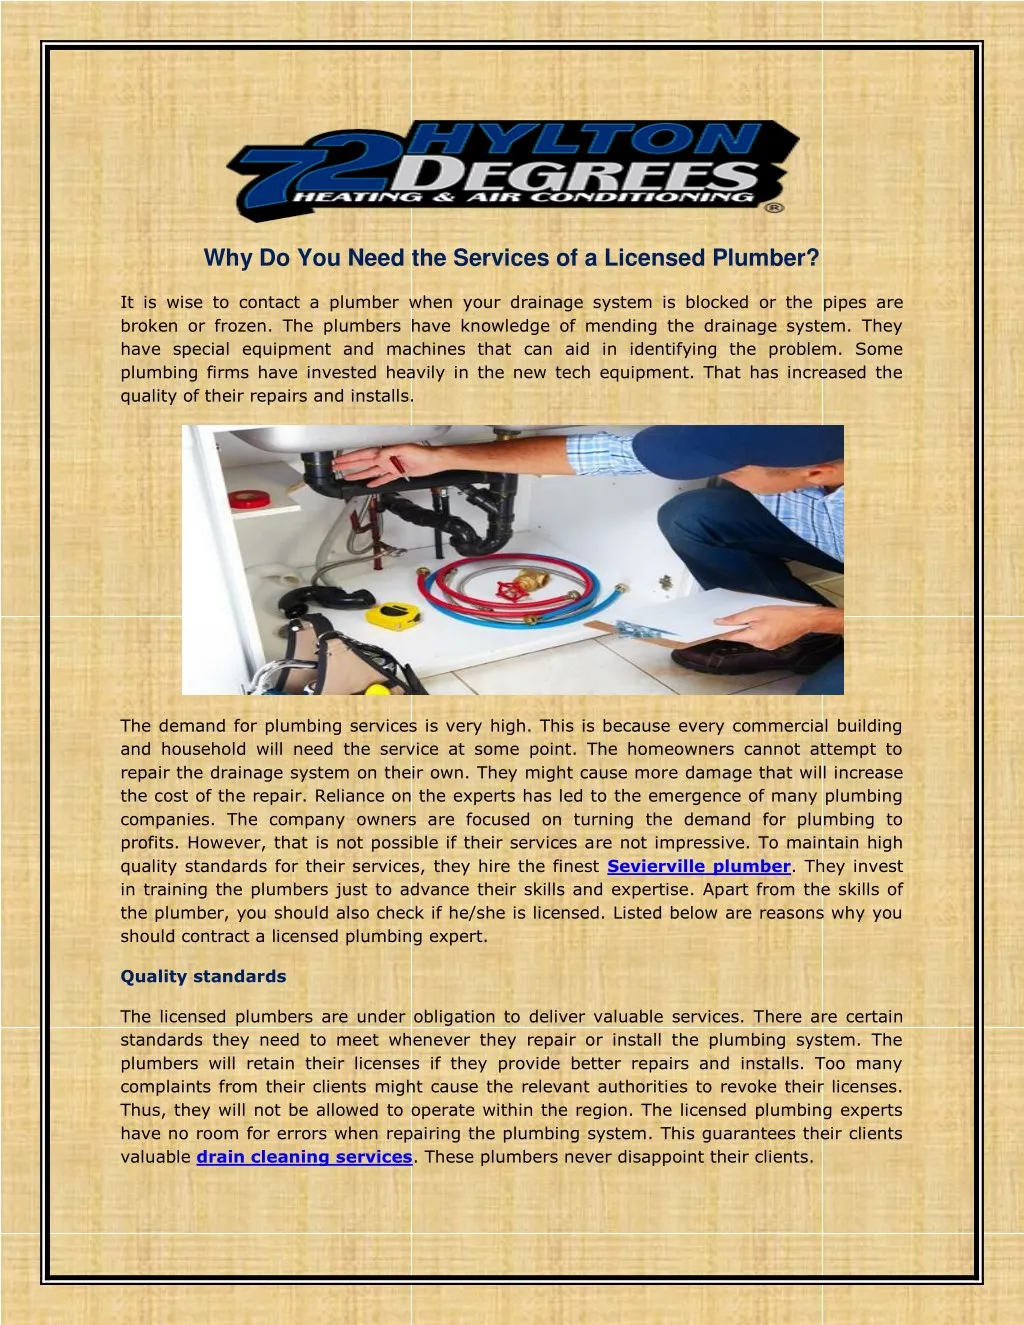 why do you need the services of a licensed plumber